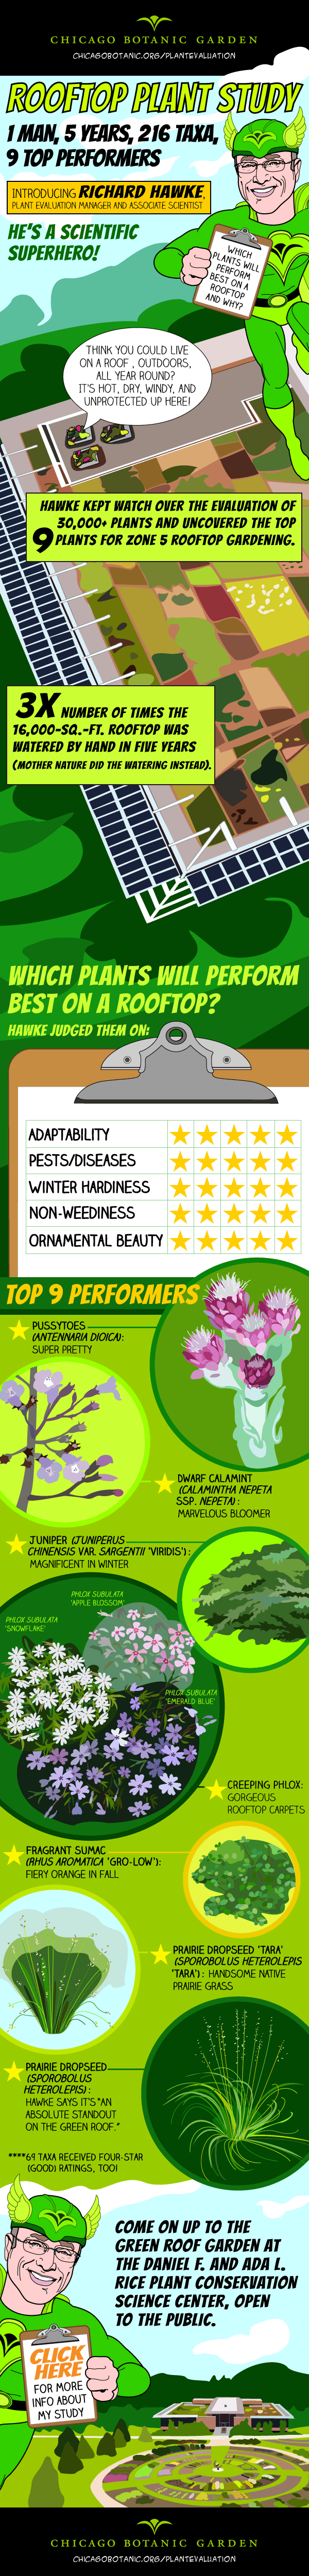 INFOGRAPHIC: Top 10 plants for green roof gardens.